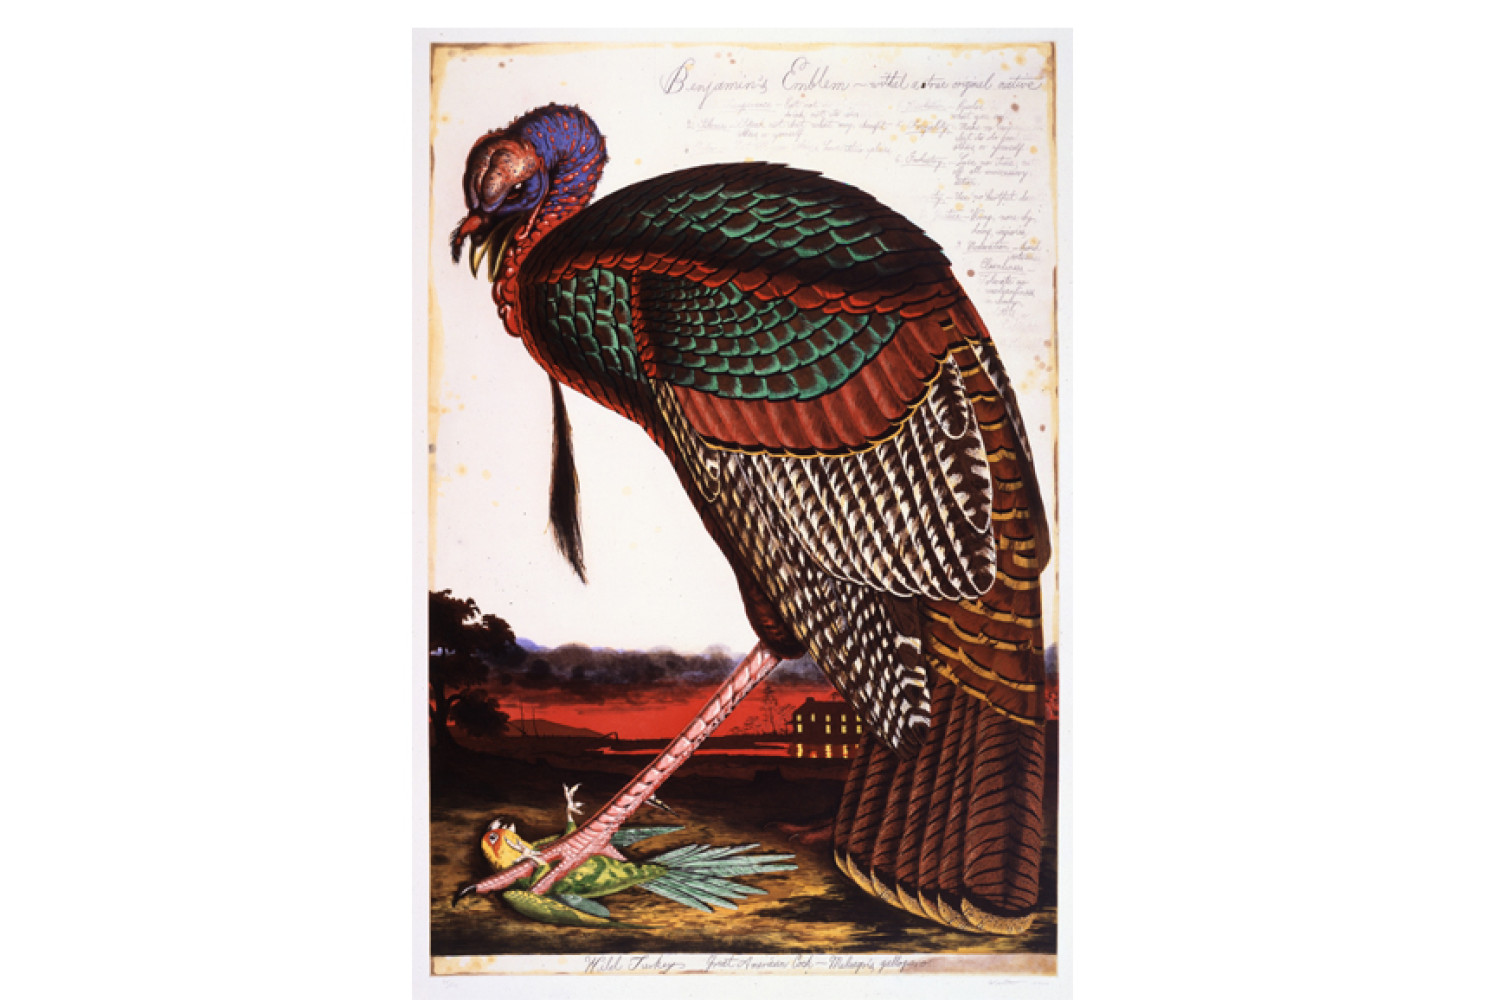 Benjamin's Emblem, 2000, By Walton Ford (American, b. 1960), Color etching, aquatint, spit-bite, and drypoint on paper. On loan courtesy of a private collection. 
